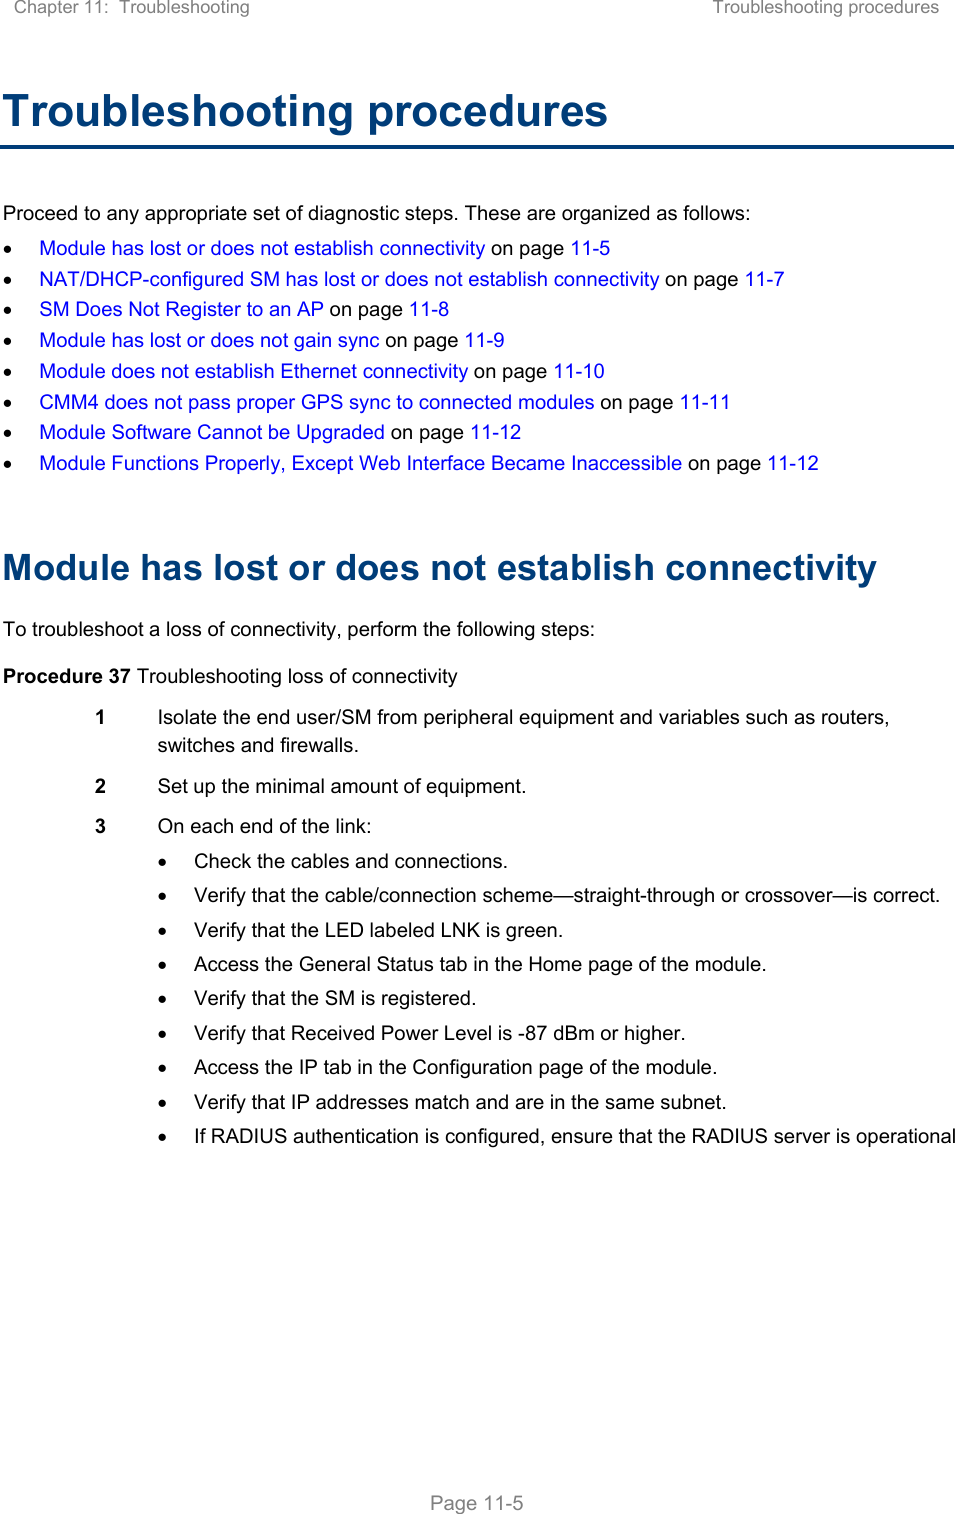 Chapter 11:  Troubleshooting  Troubleshooting procedures   Page 11-5 Troubleshooting procedures Proceed to any appropriate set of diagnostic steps. These are organized as follows:  Module has lost or does not establish connectivity on page 11-5  NAT/DHCP-configured SM has lost or does not establish connectivity on page 11-7  SM Does Not Register to an AP on page 11-8  Module has lost or does not gain sync on page 11-9  Module does not establish Ethernet connectivity on page 11-10  CMM4 does not pass proper GPS sync to connected modules on page 11-11  Module Software Cannot be Upgraded on page 11-12  Module Functions Properly, Except Web Interface Became Inaccessible on page 11-12  Module has lost or does not establish connectivity To troubleshoot a loss of connectivity, perform the following steps: Procedure 37 Troubleshooting loss of connectivity 1  Isolate the end user/SM from peripheral equipment and variables such as routers, switches and firewalls.  2  Set up the minimal amount of equipment. 3  On each end of the link:   Check the cables and connections.   Verify that the cable/connection scheme—straight-through or crossover—is correct.   Verify that the LED labeled LNK is green.   Access the General Status tab in the Home page of the module.   Verify that the SM is registered.   Verify that Received Power Level is -87 dBm or higher.   Access the IP tab in the Configuration page of the module.   Verify that IP addresses match and are in the same subnet.   If RADIUS authentication is configured, ensure that the RADIUS server is operational  